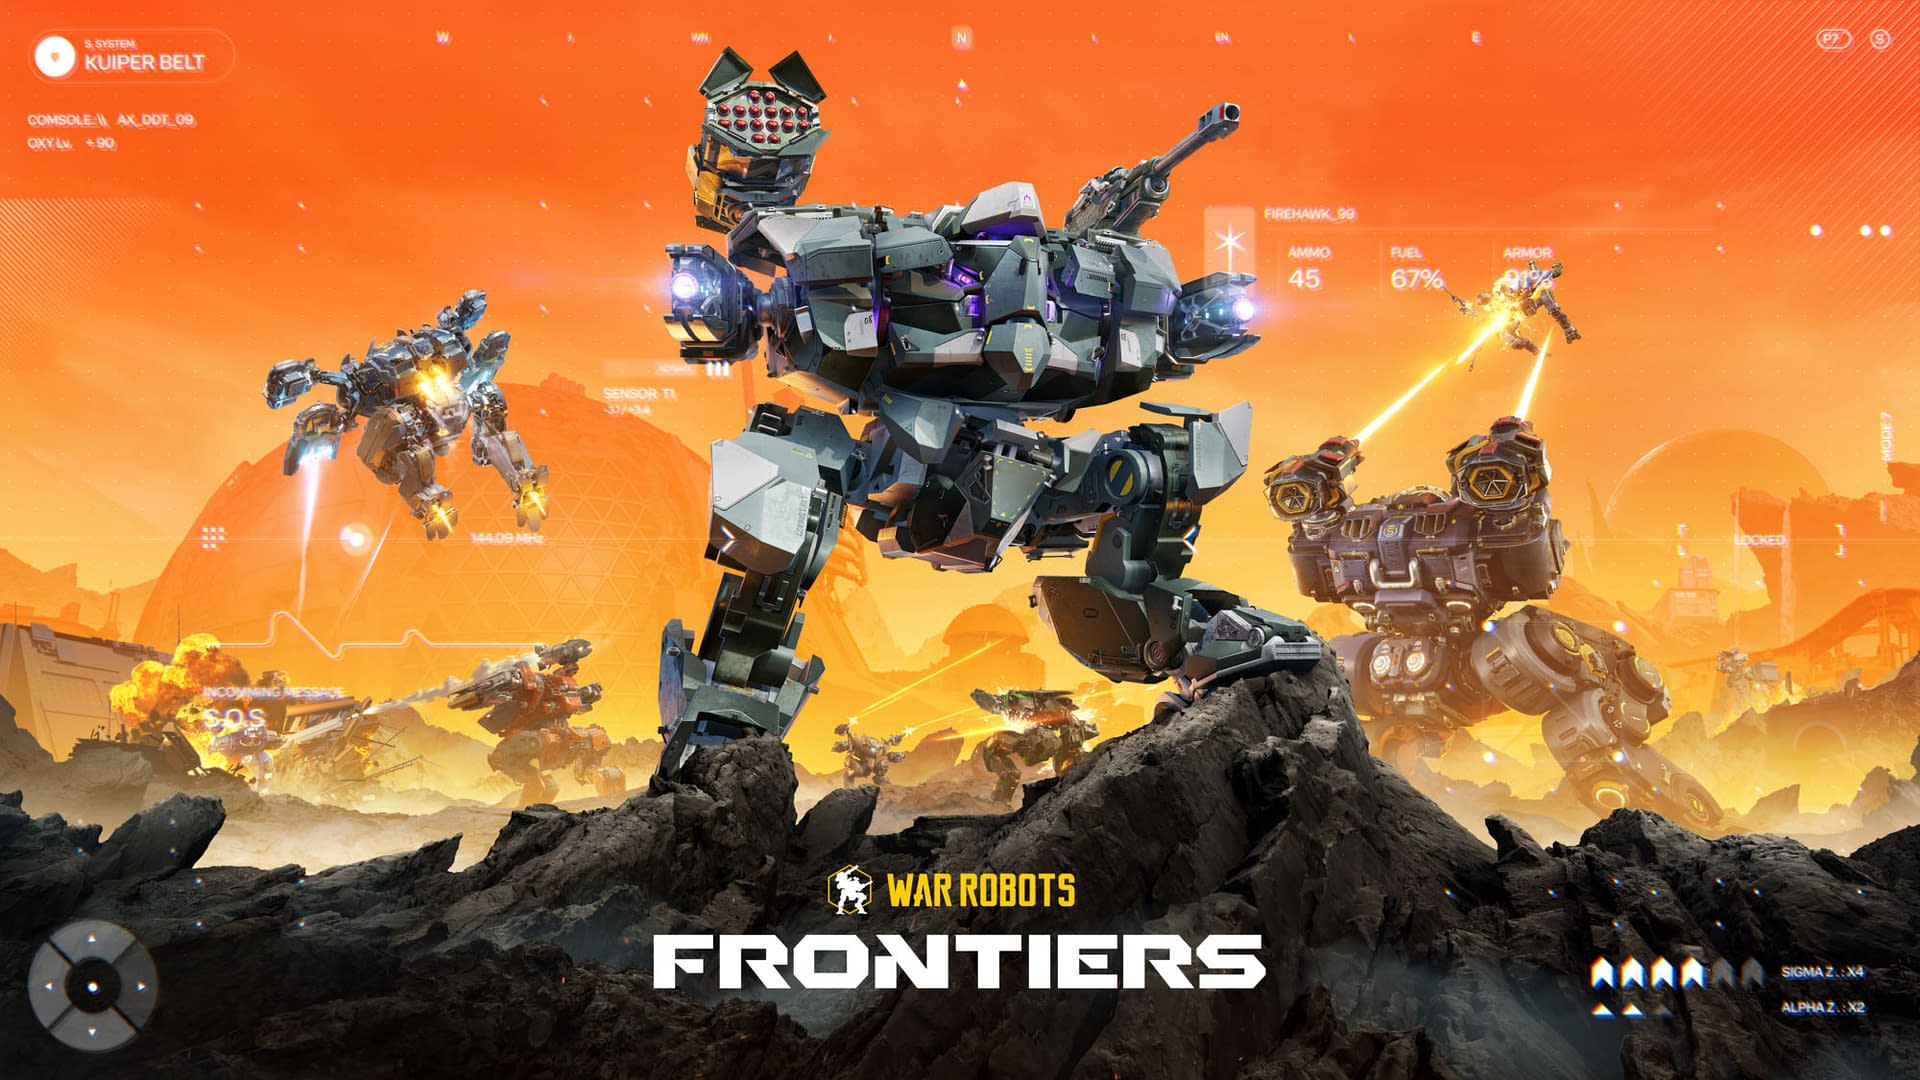 War Robots Frontiers Announced For PC and Console In 2023